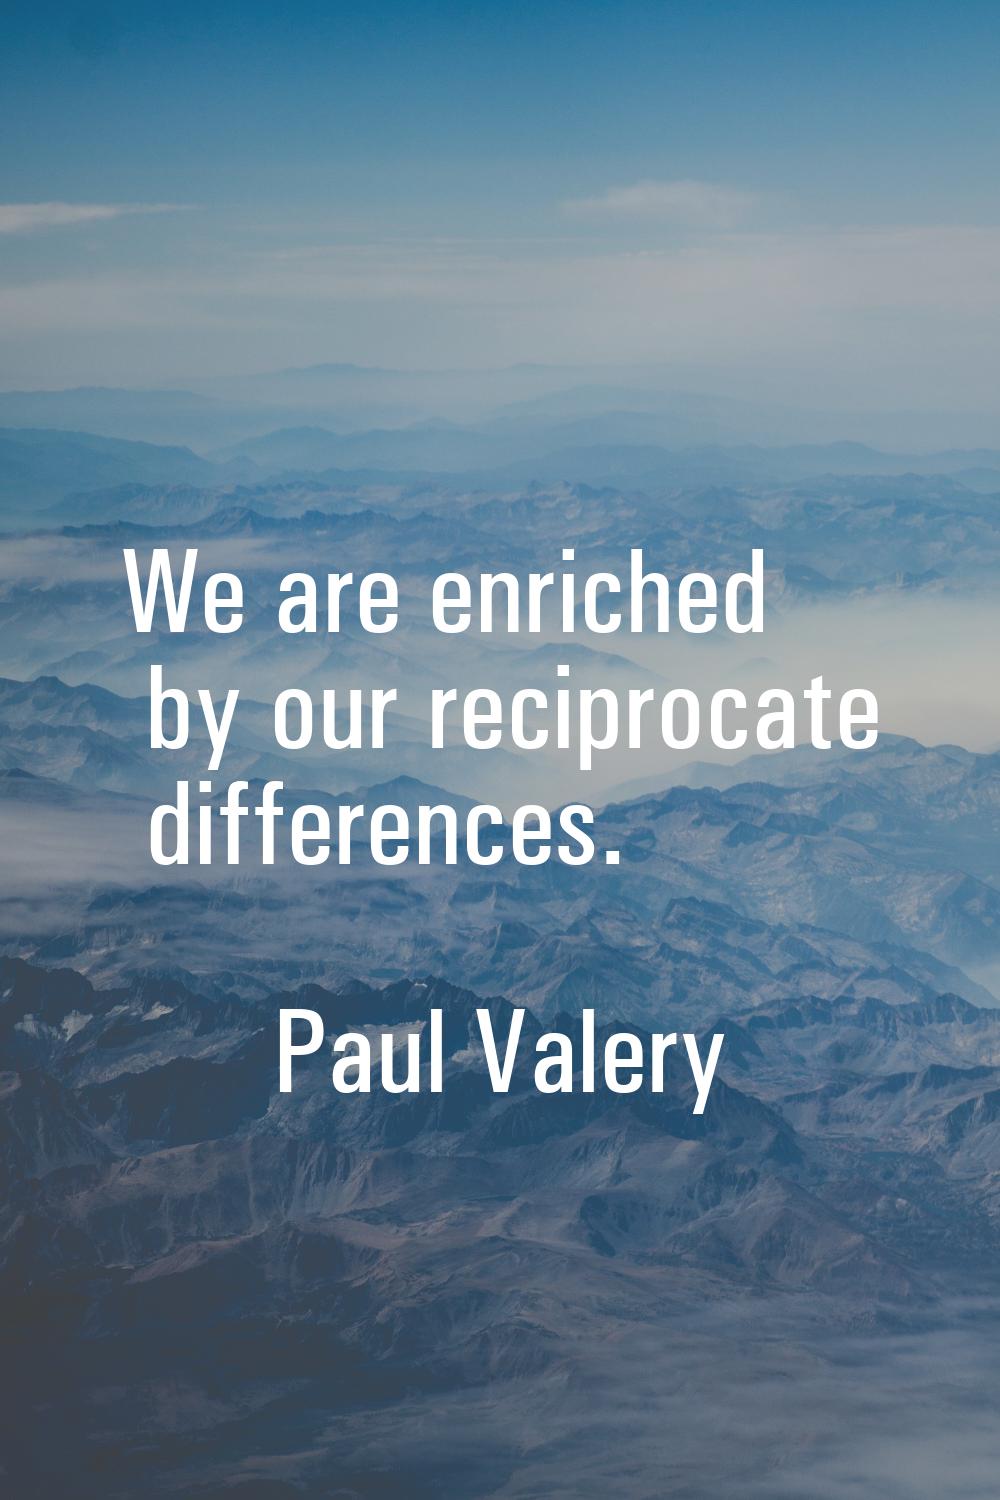 We are enriched by our reciprocate differences.